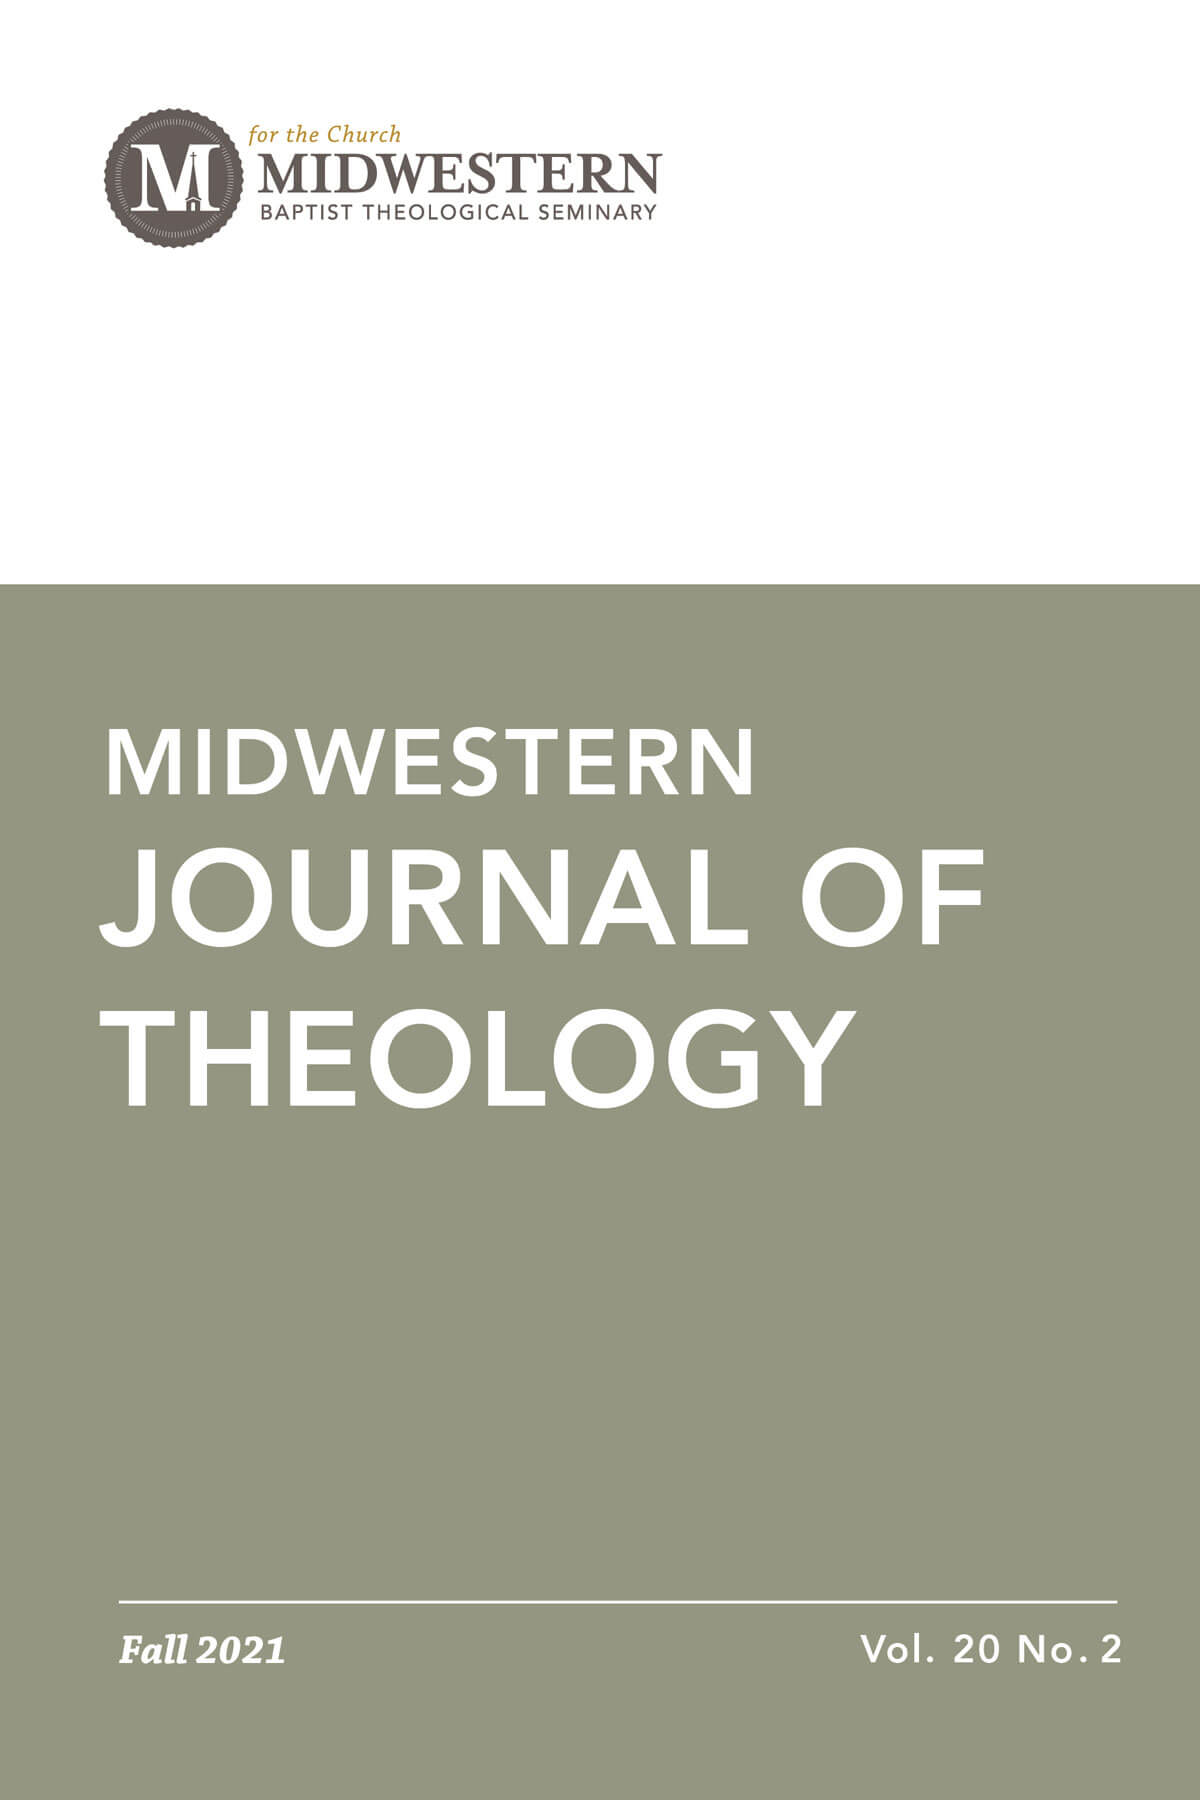 Fall 2021 Midwestern Journal of Theology